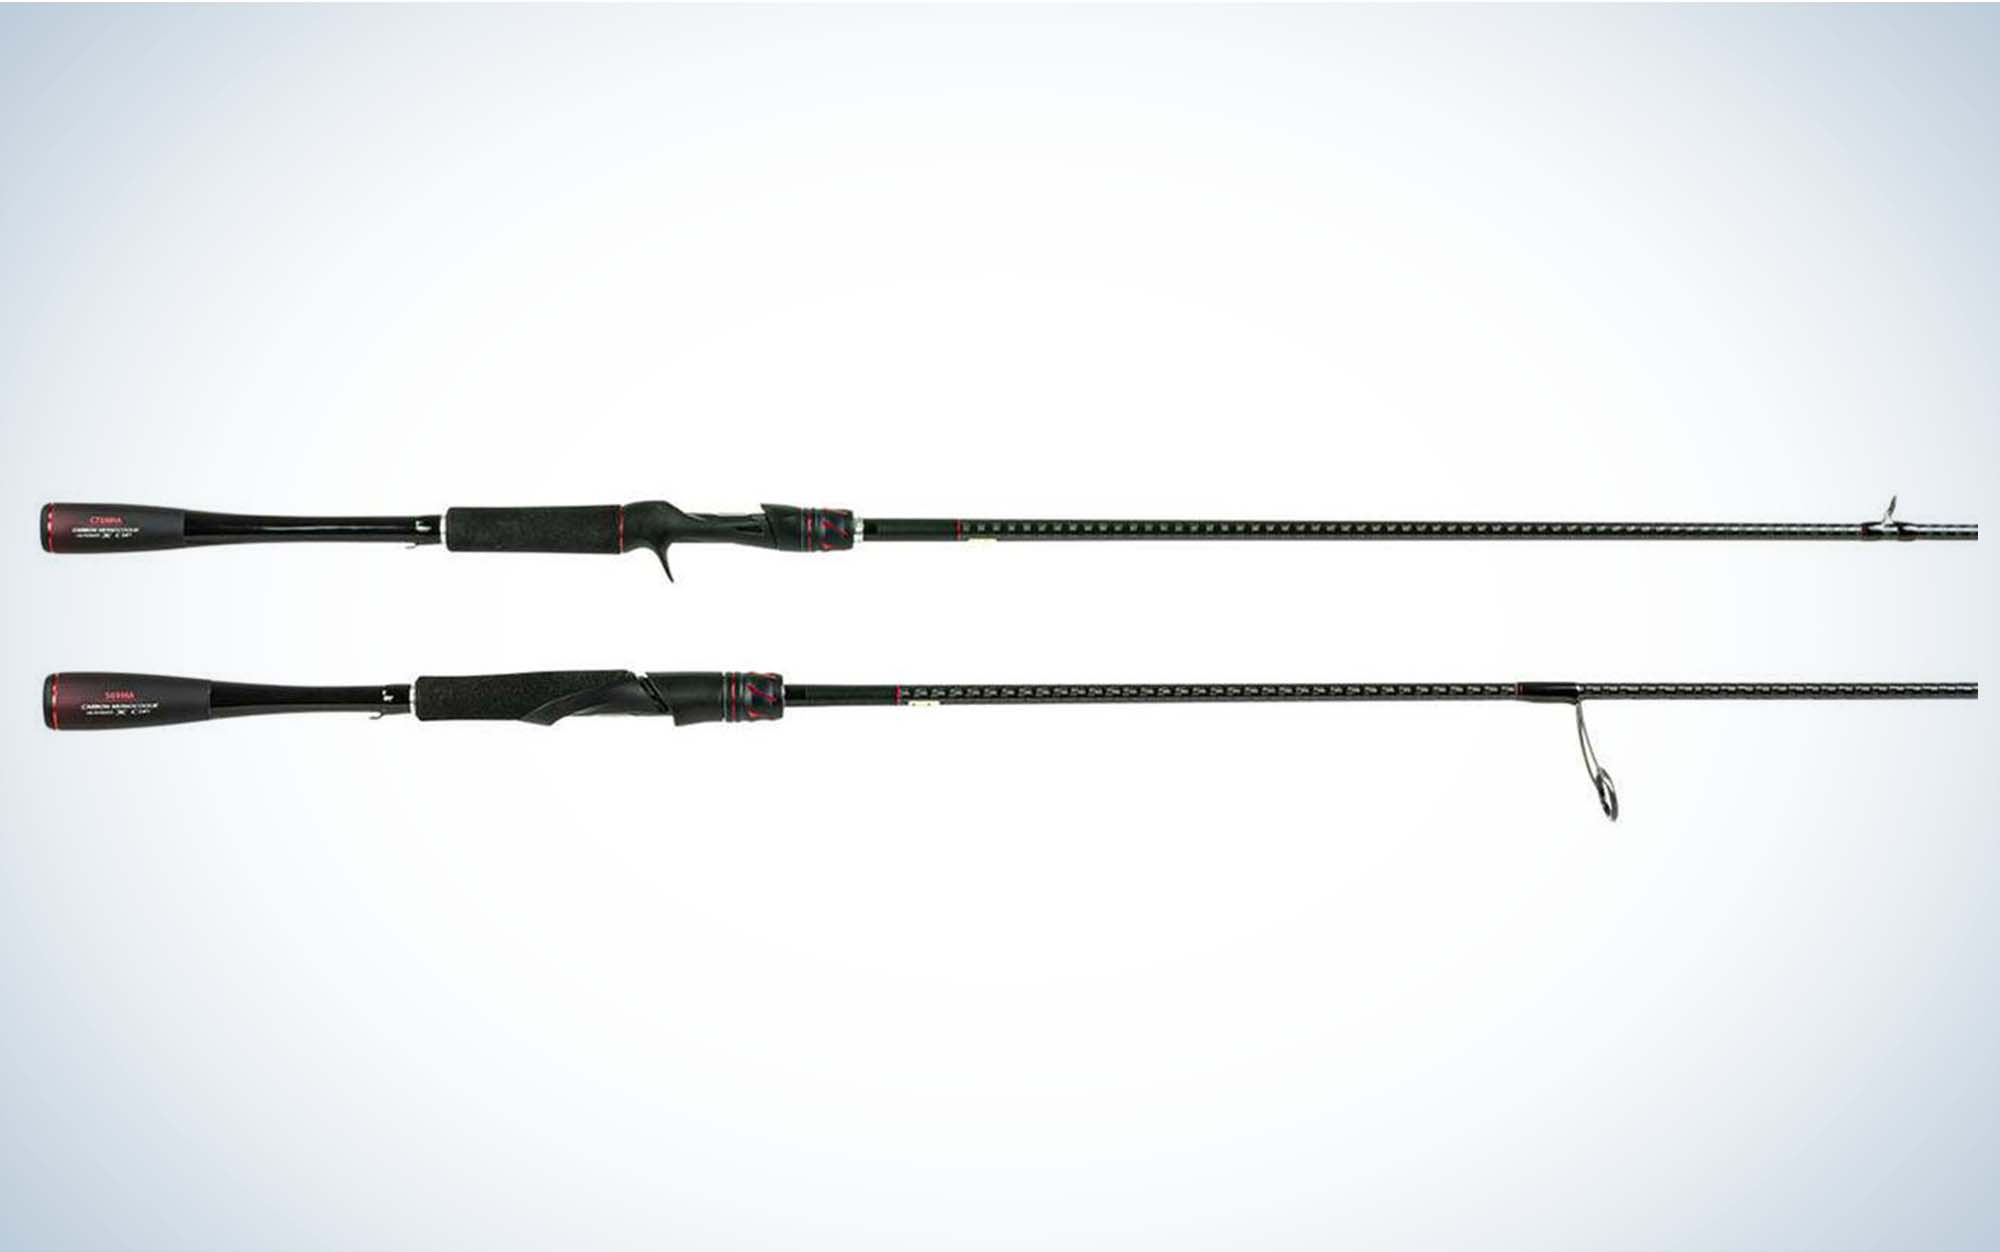 World Traveller Super Compact Spin Fishing Rod & Reel Travel